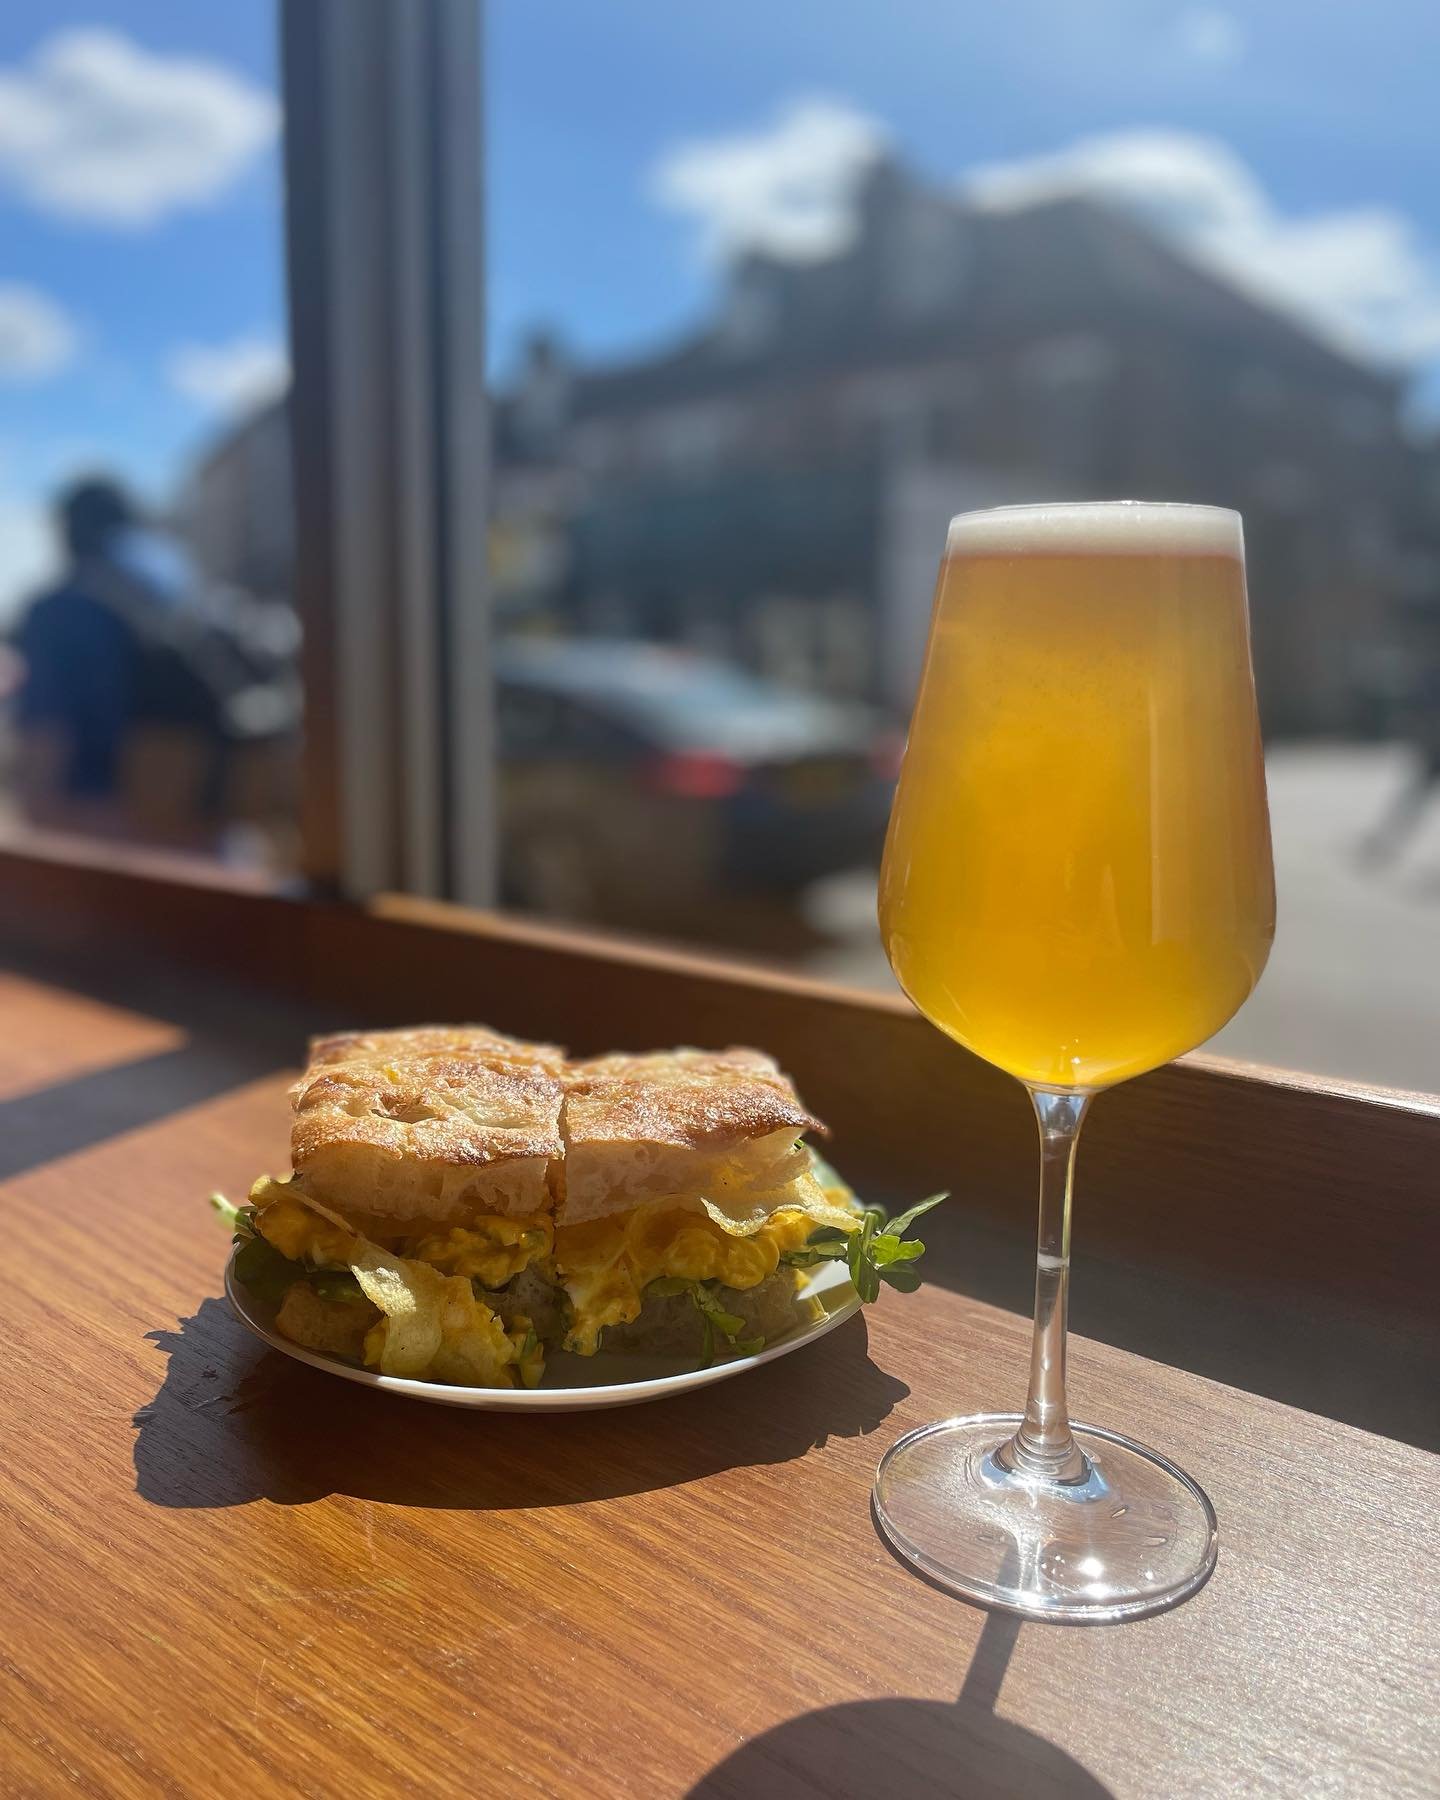 Summer weather has arrived! And with it a fresh new cafe lunch menu 😎 scroll to see that.

Today is a day for the iconic Torres truffle crisp and egg mayo focaccia, paired with an ice cold Pillars Pilsner, get down quick before they&rsquo;re gone!